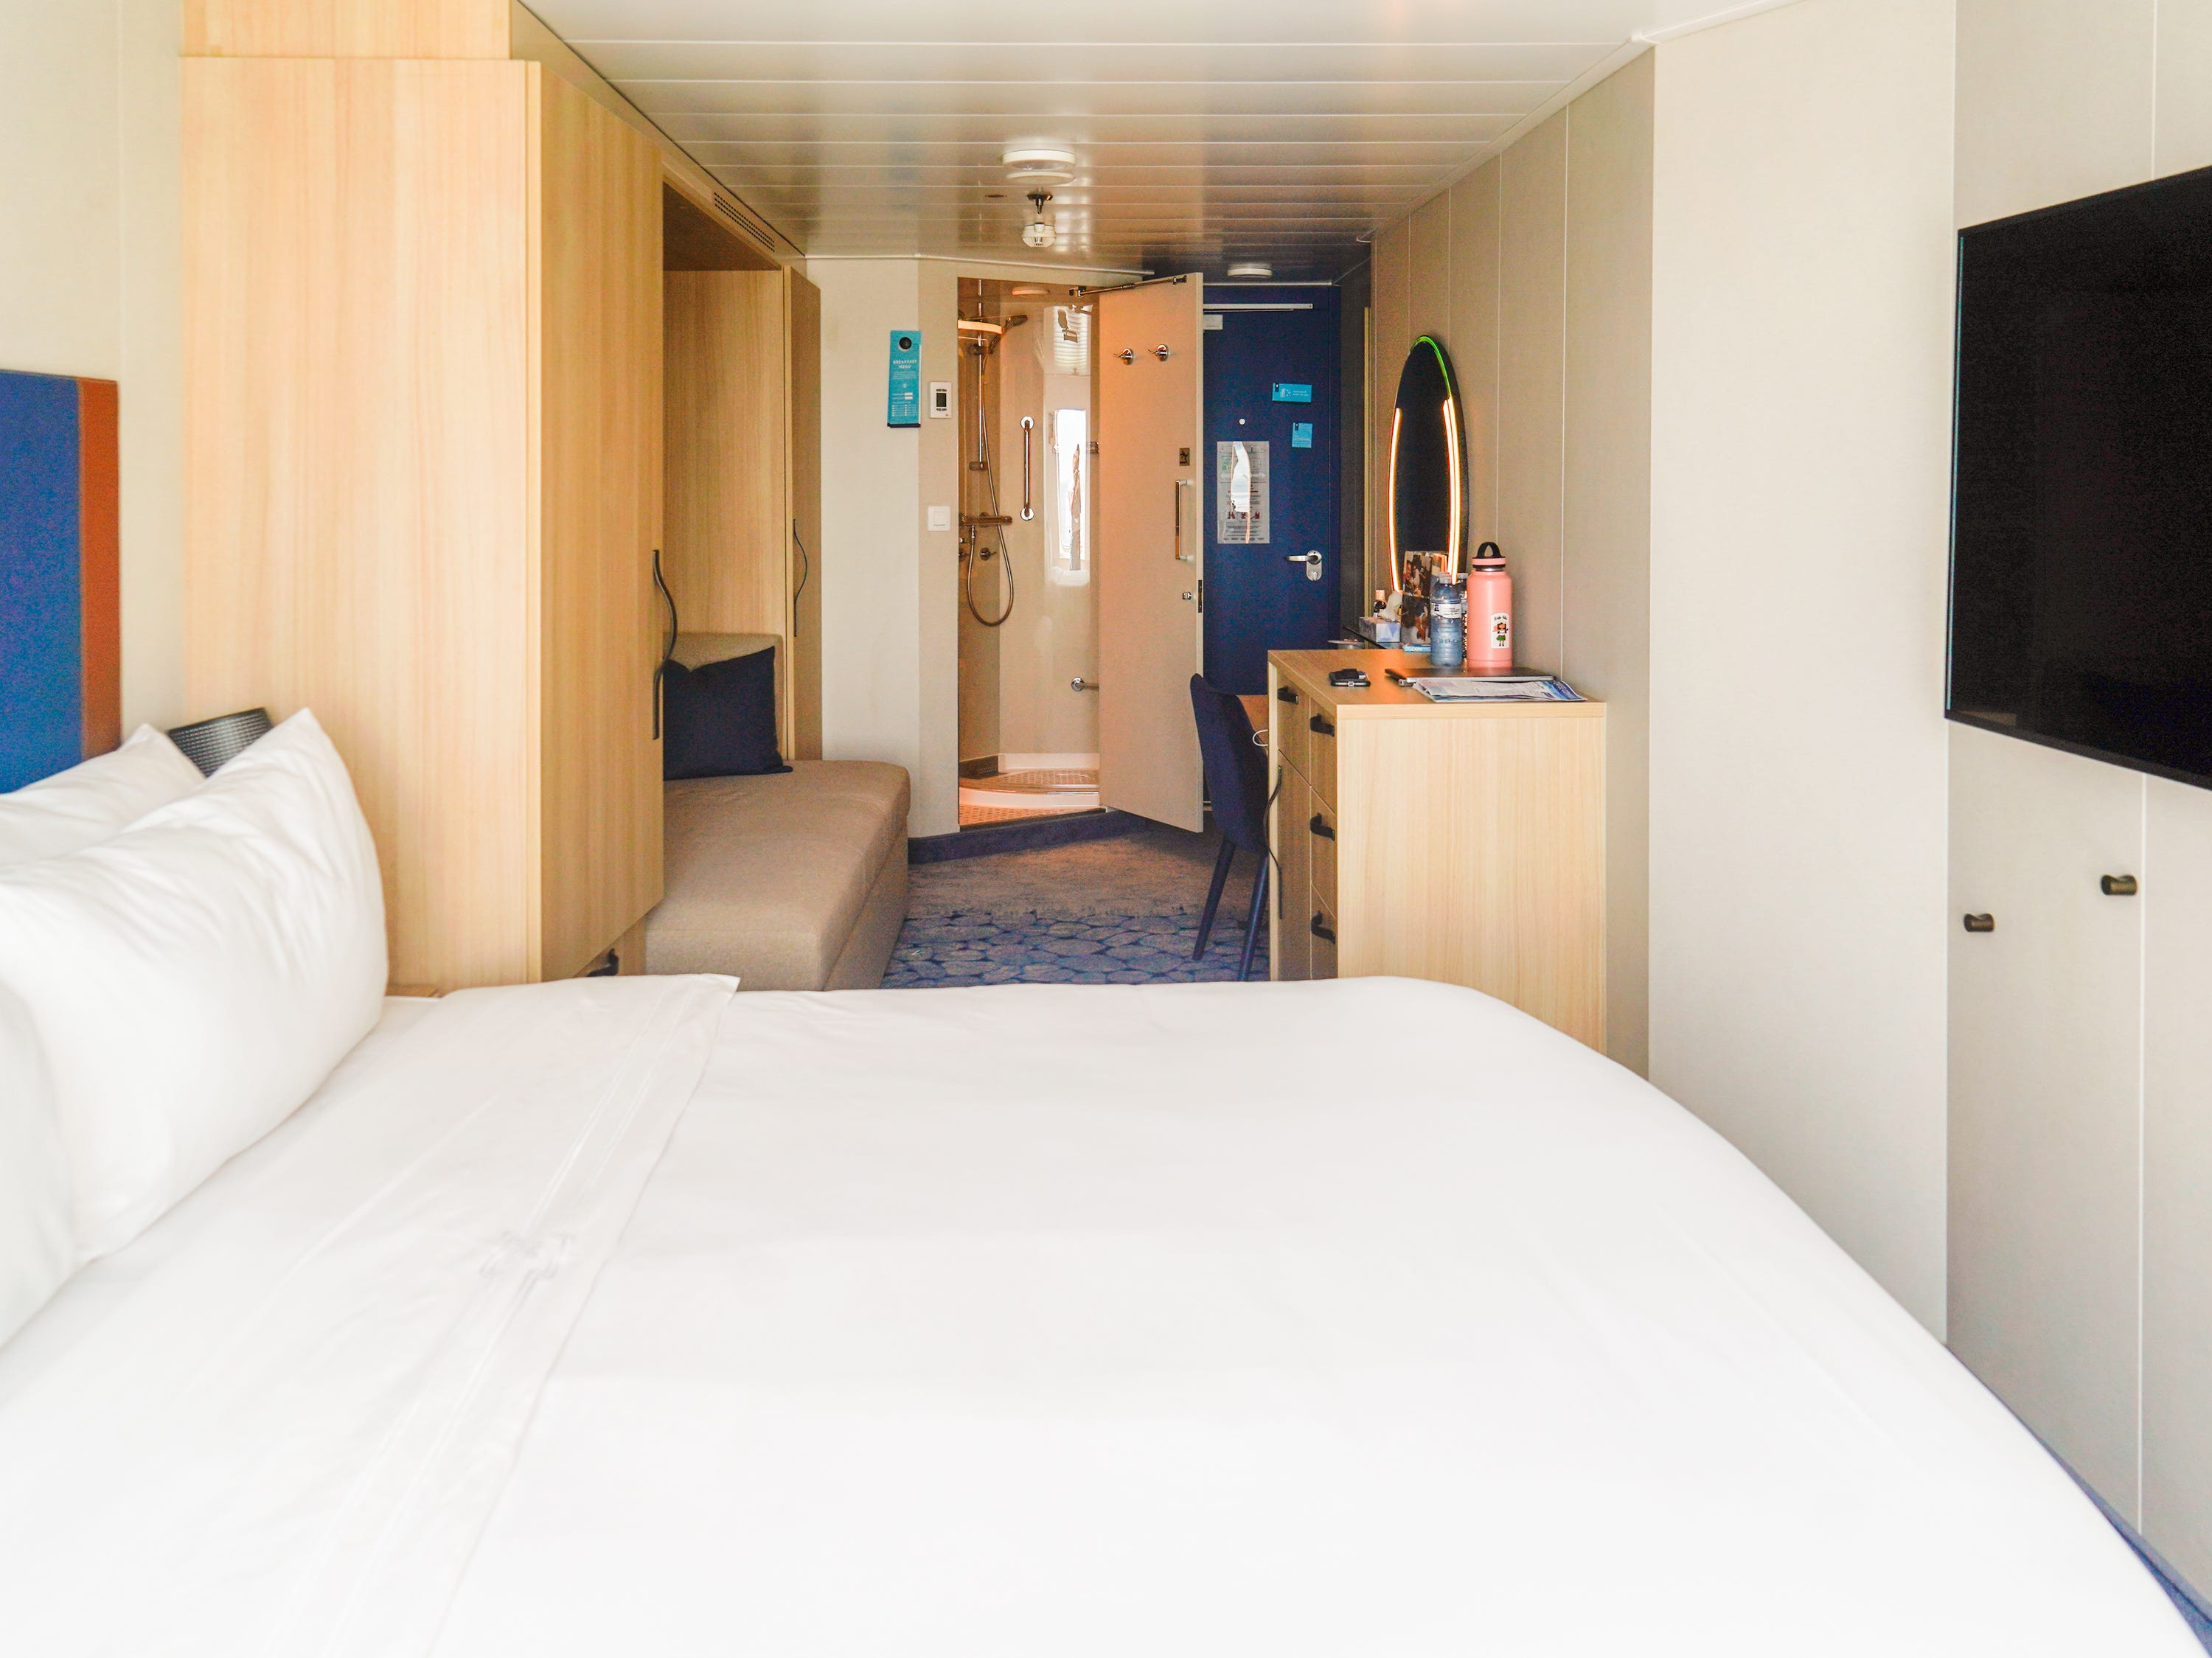 <p>I thought the stateroom made great use of a small space with plenty of storage for my clothes and other belongings. There were two closets for hanging space and more drawers than I ended up using. </p>